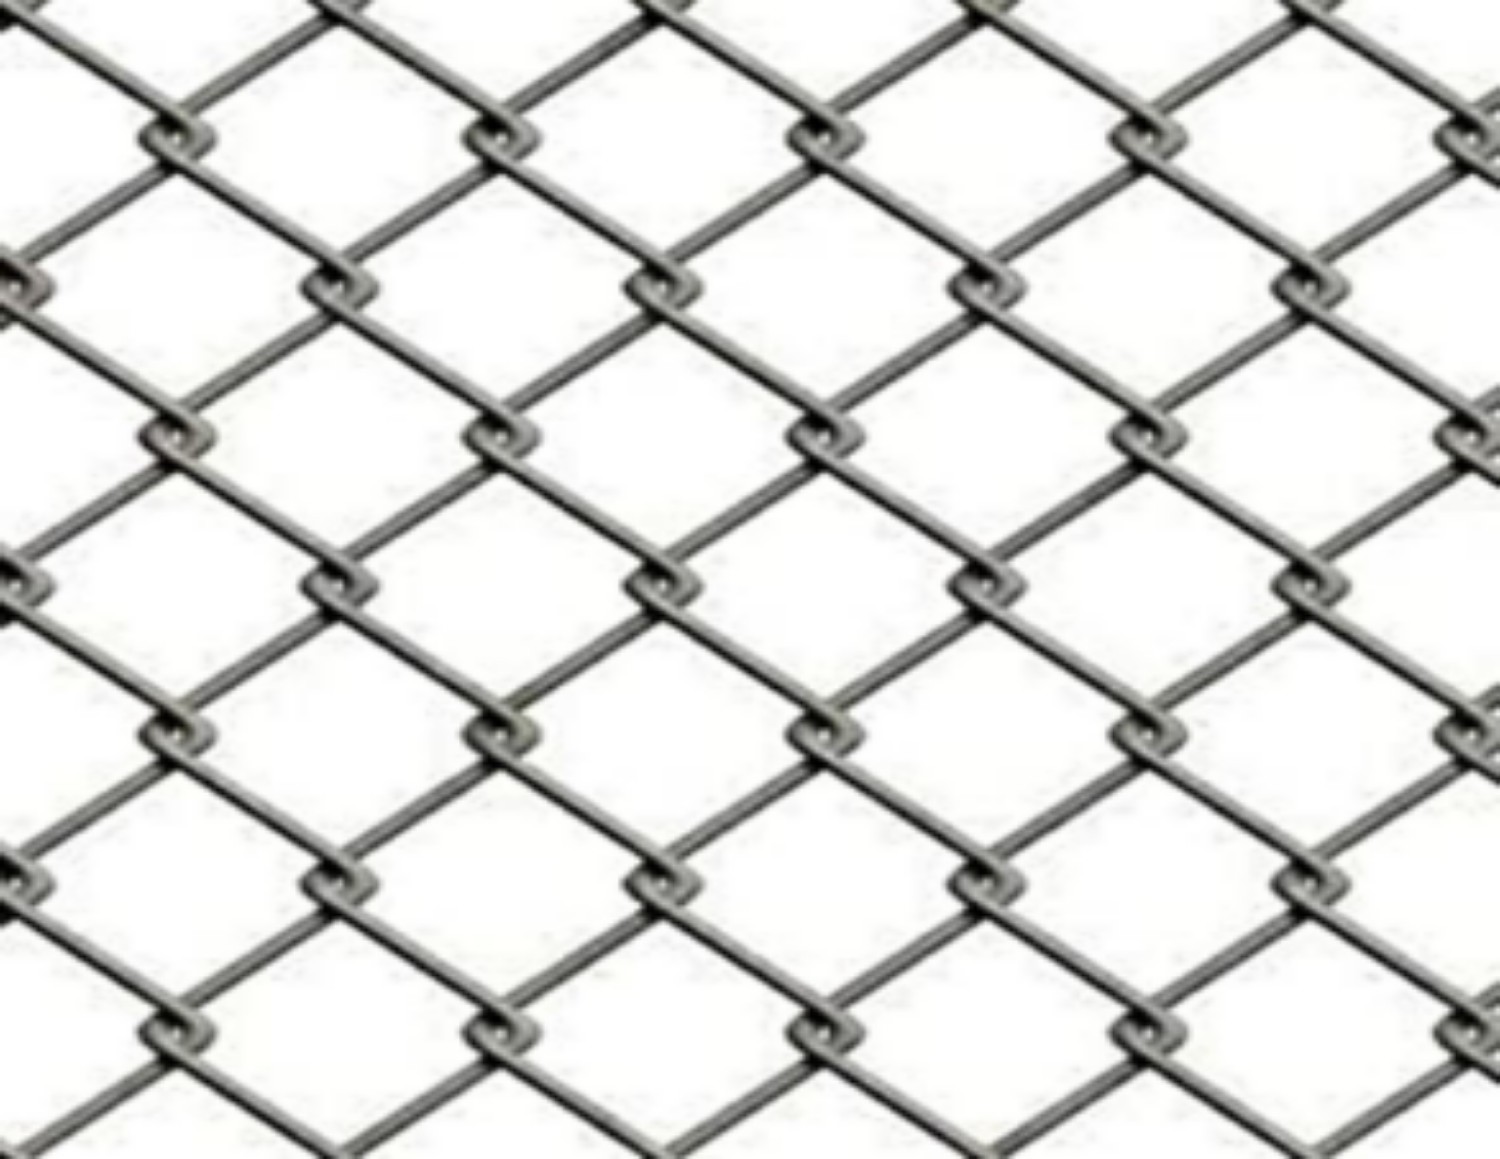 Good Fencing chain  link MS Fence 1200 x 1500 mm_0